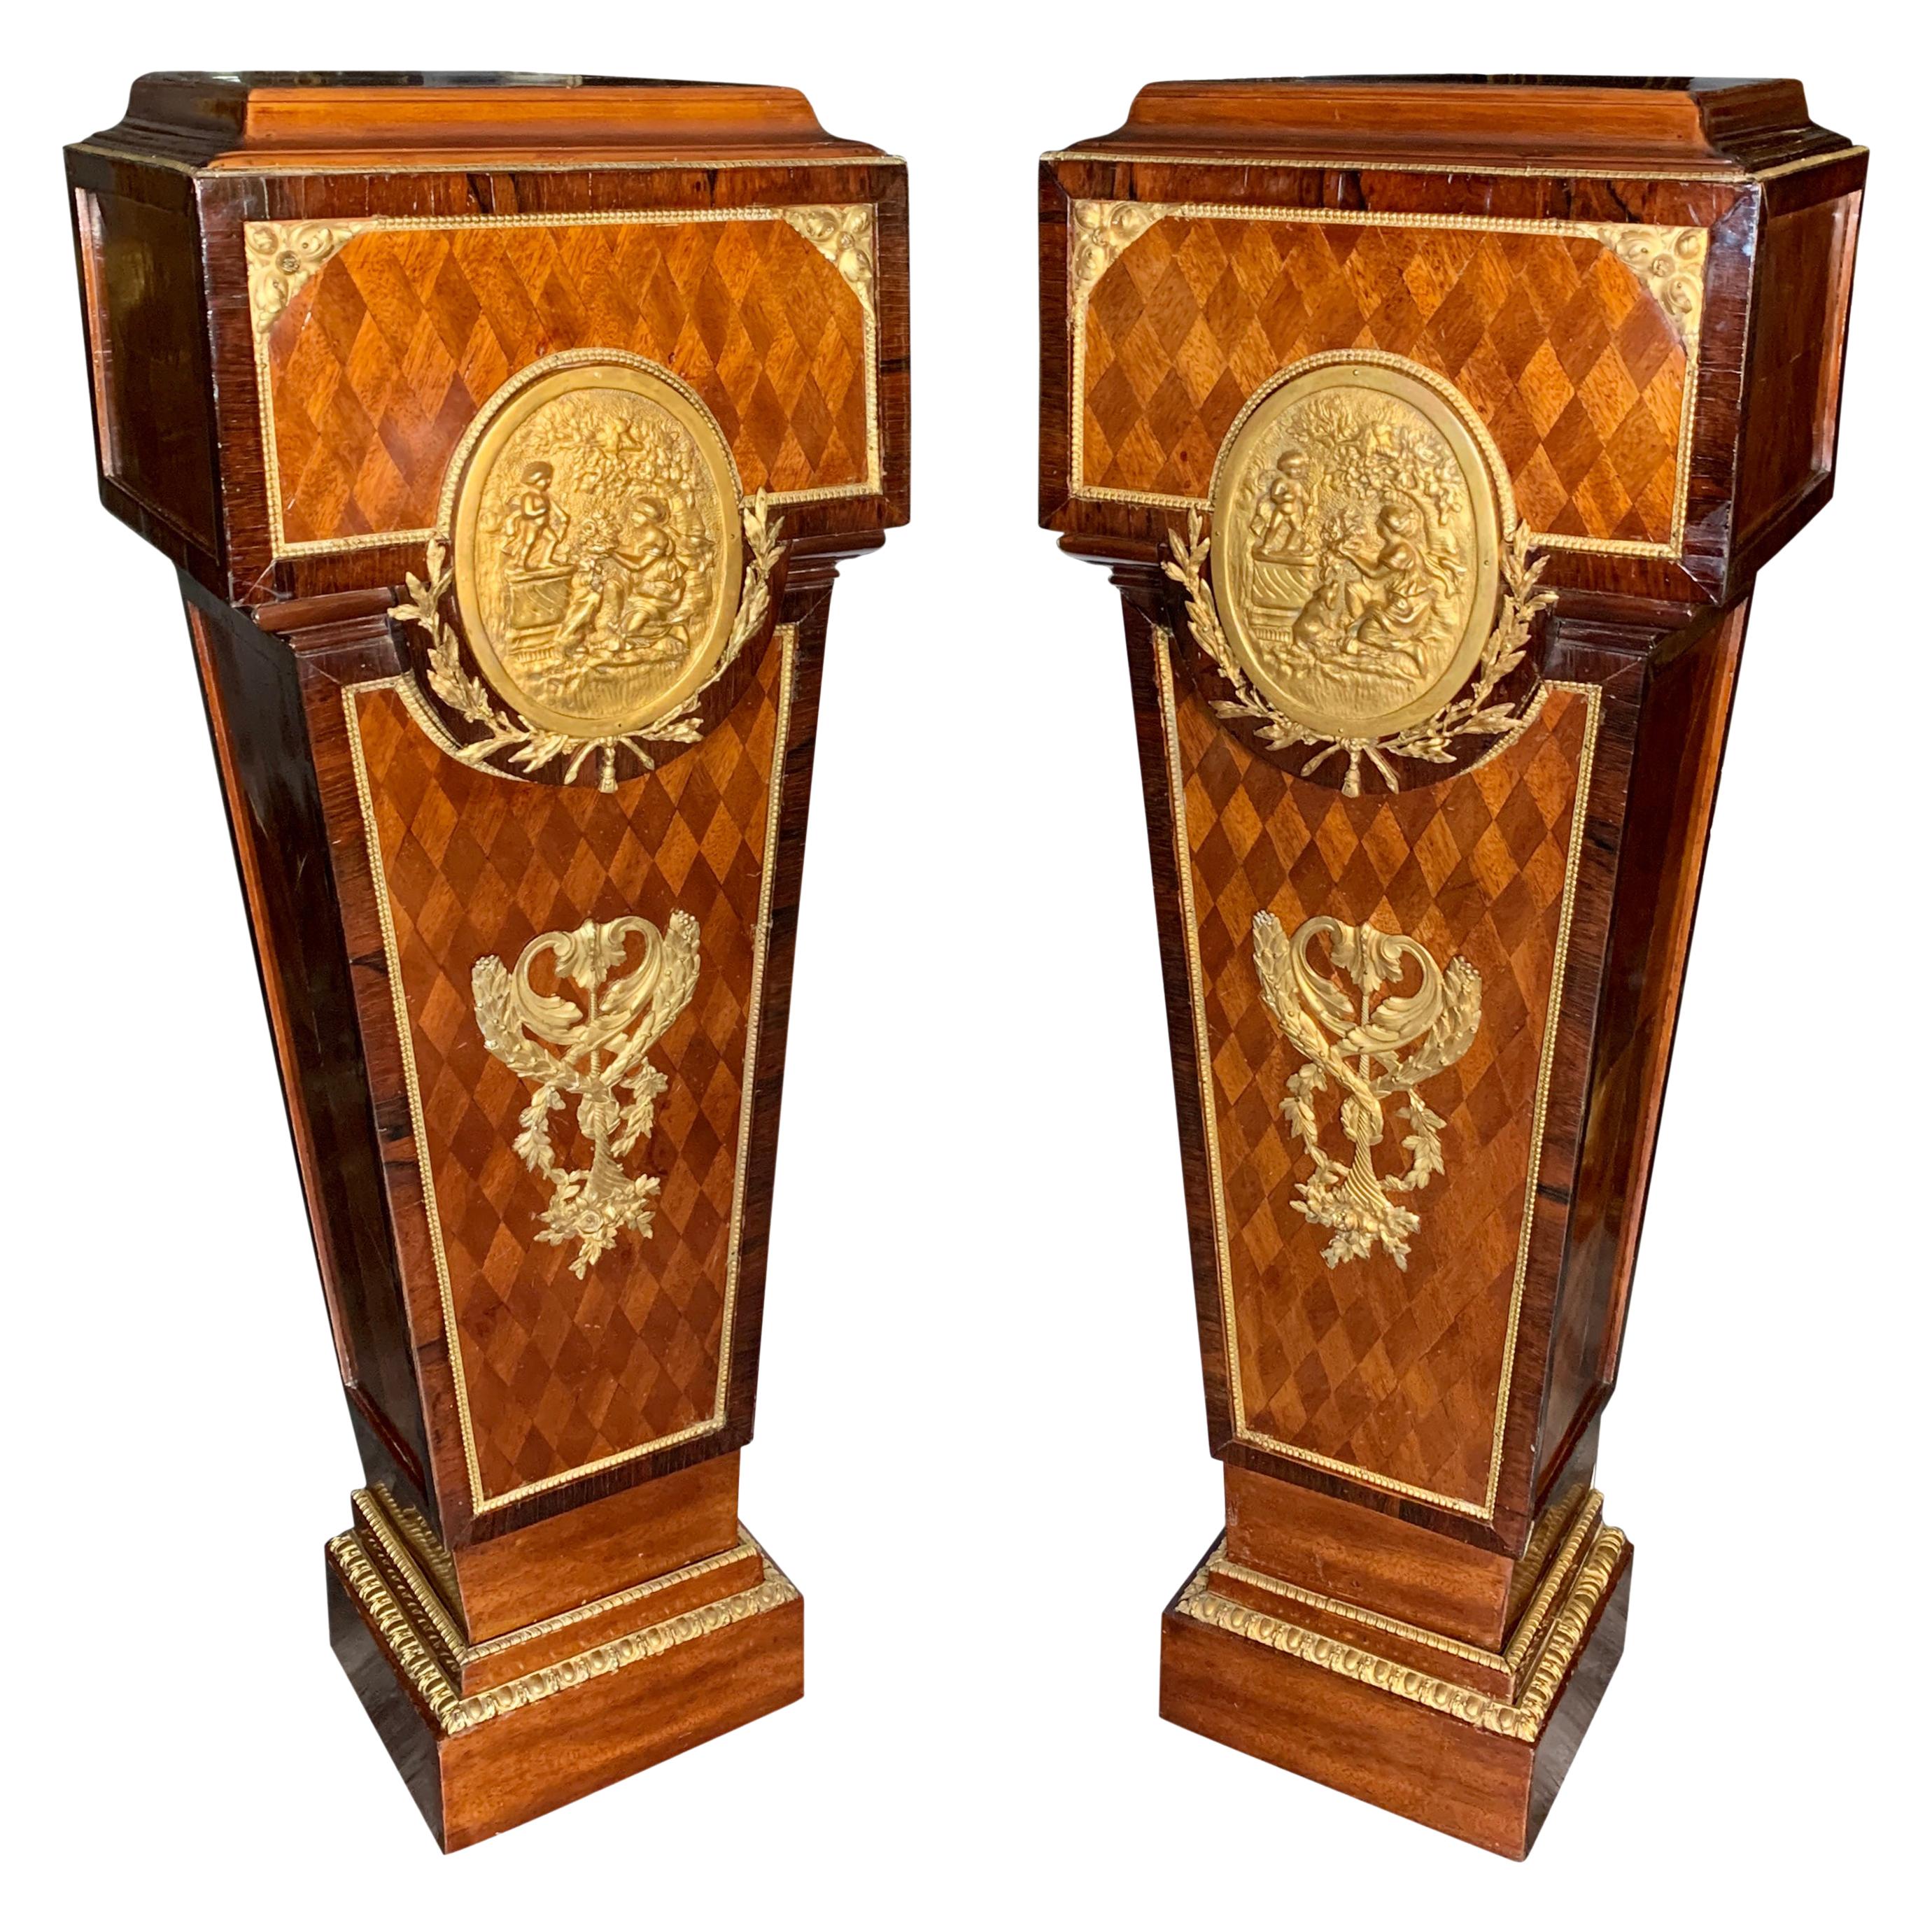 Pair of Antique French Gilt Bronze Mounted Parquetry Pedestals